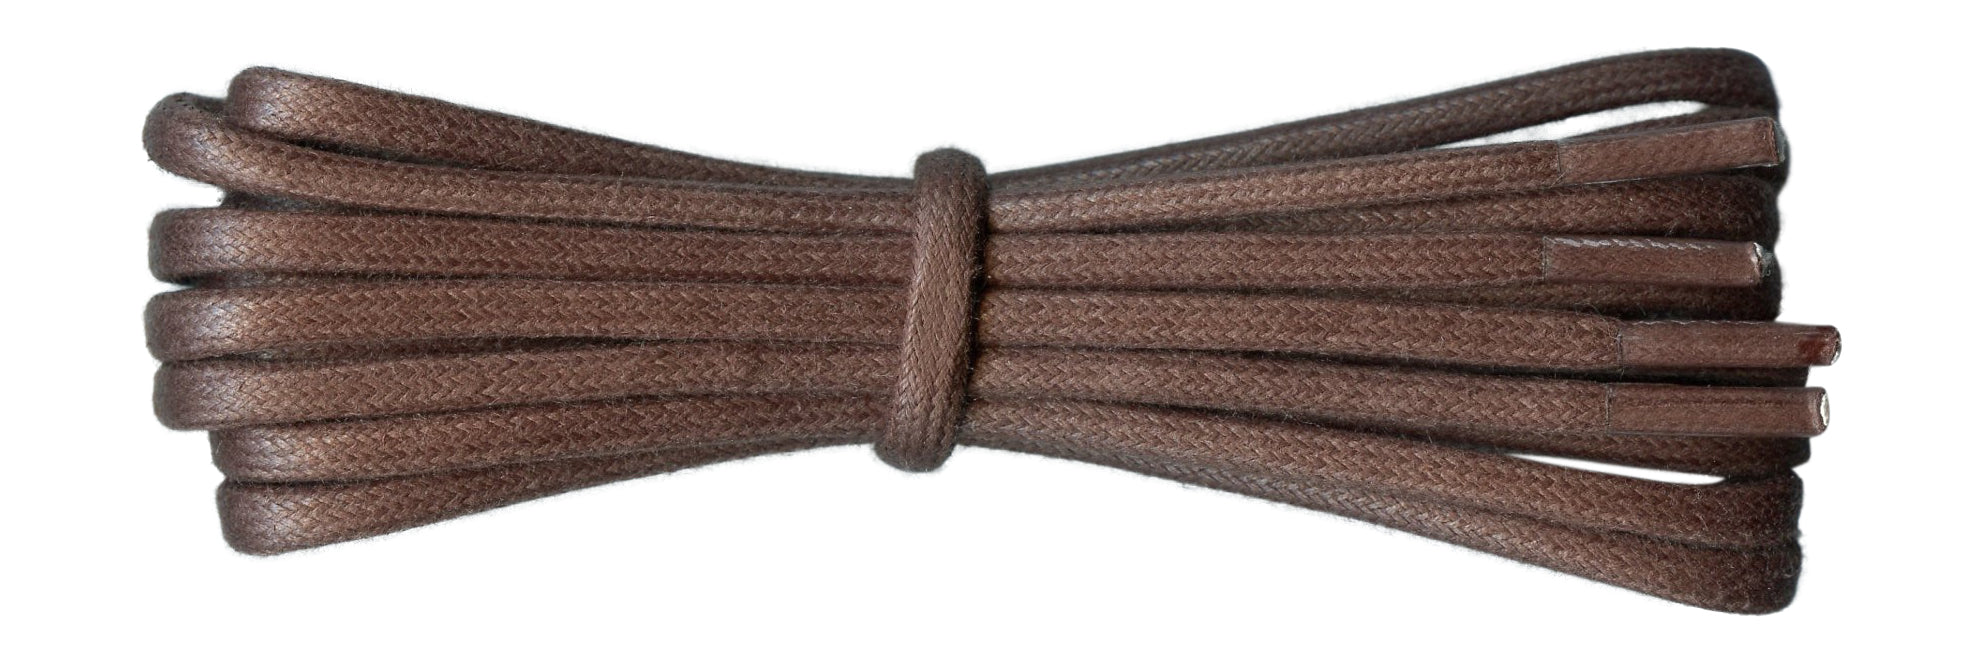 Thick Brown waxed cotton boot laces 4.5 